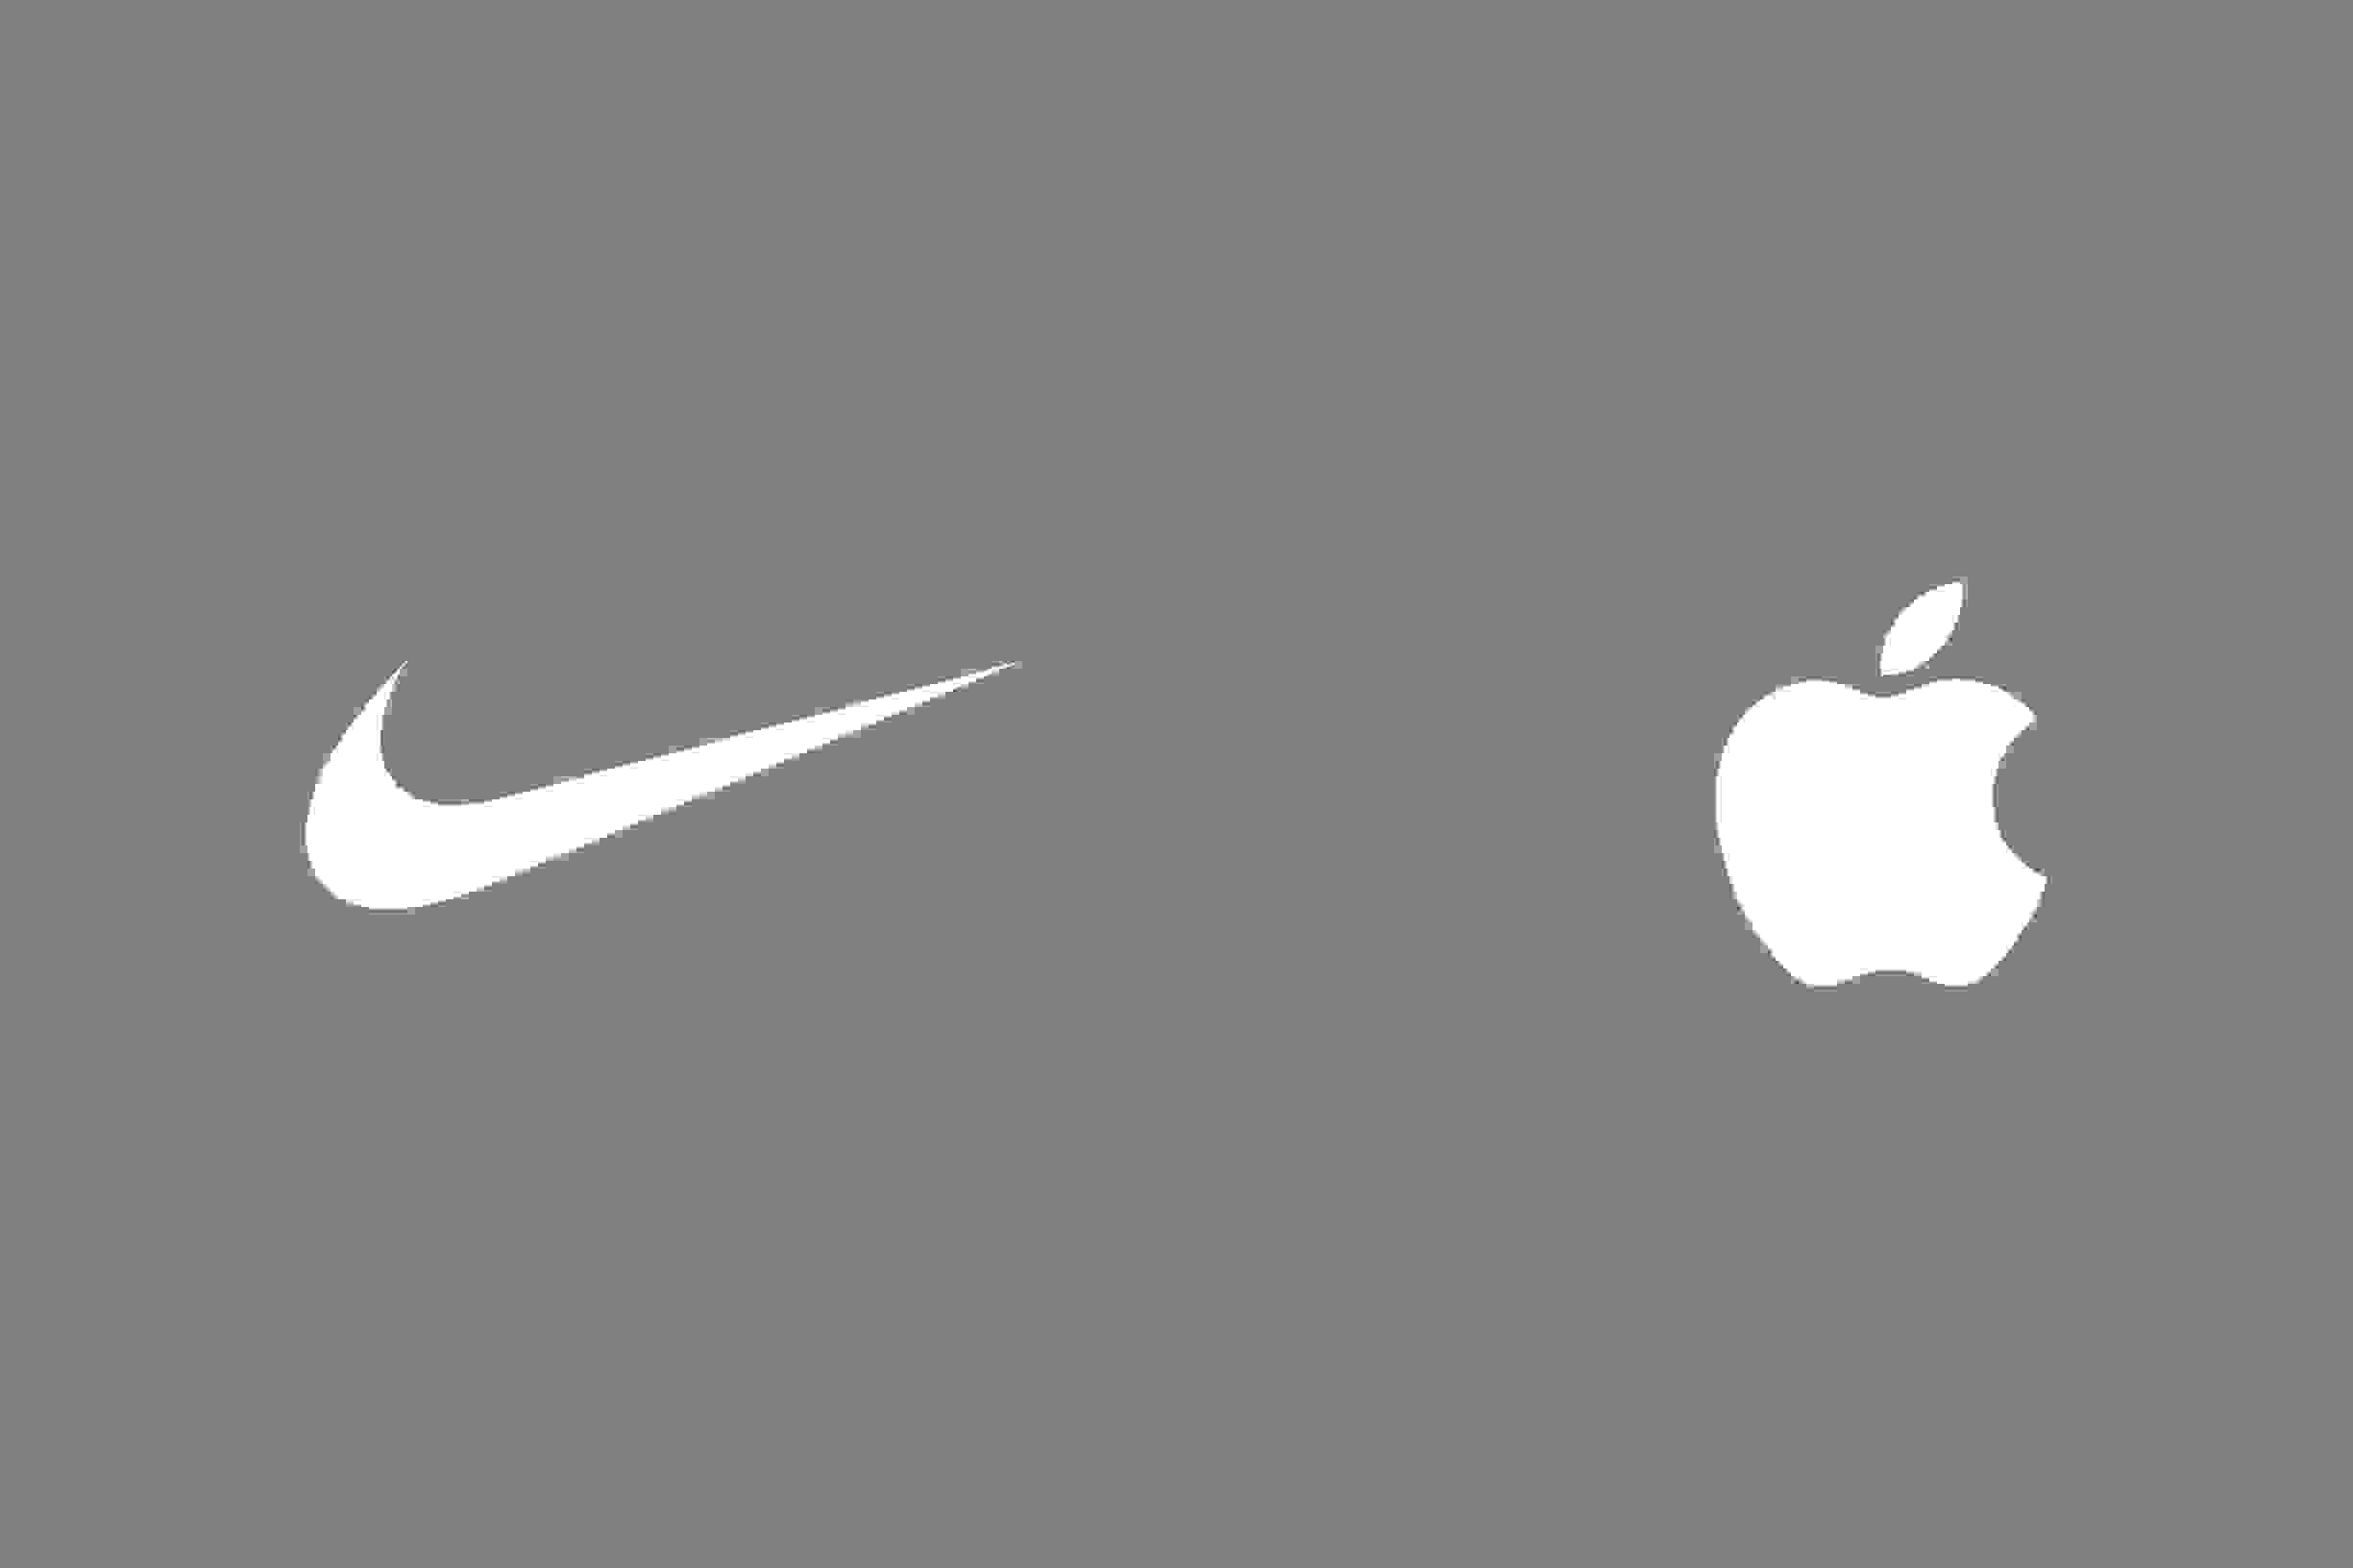 Nike and Apple logo side by side